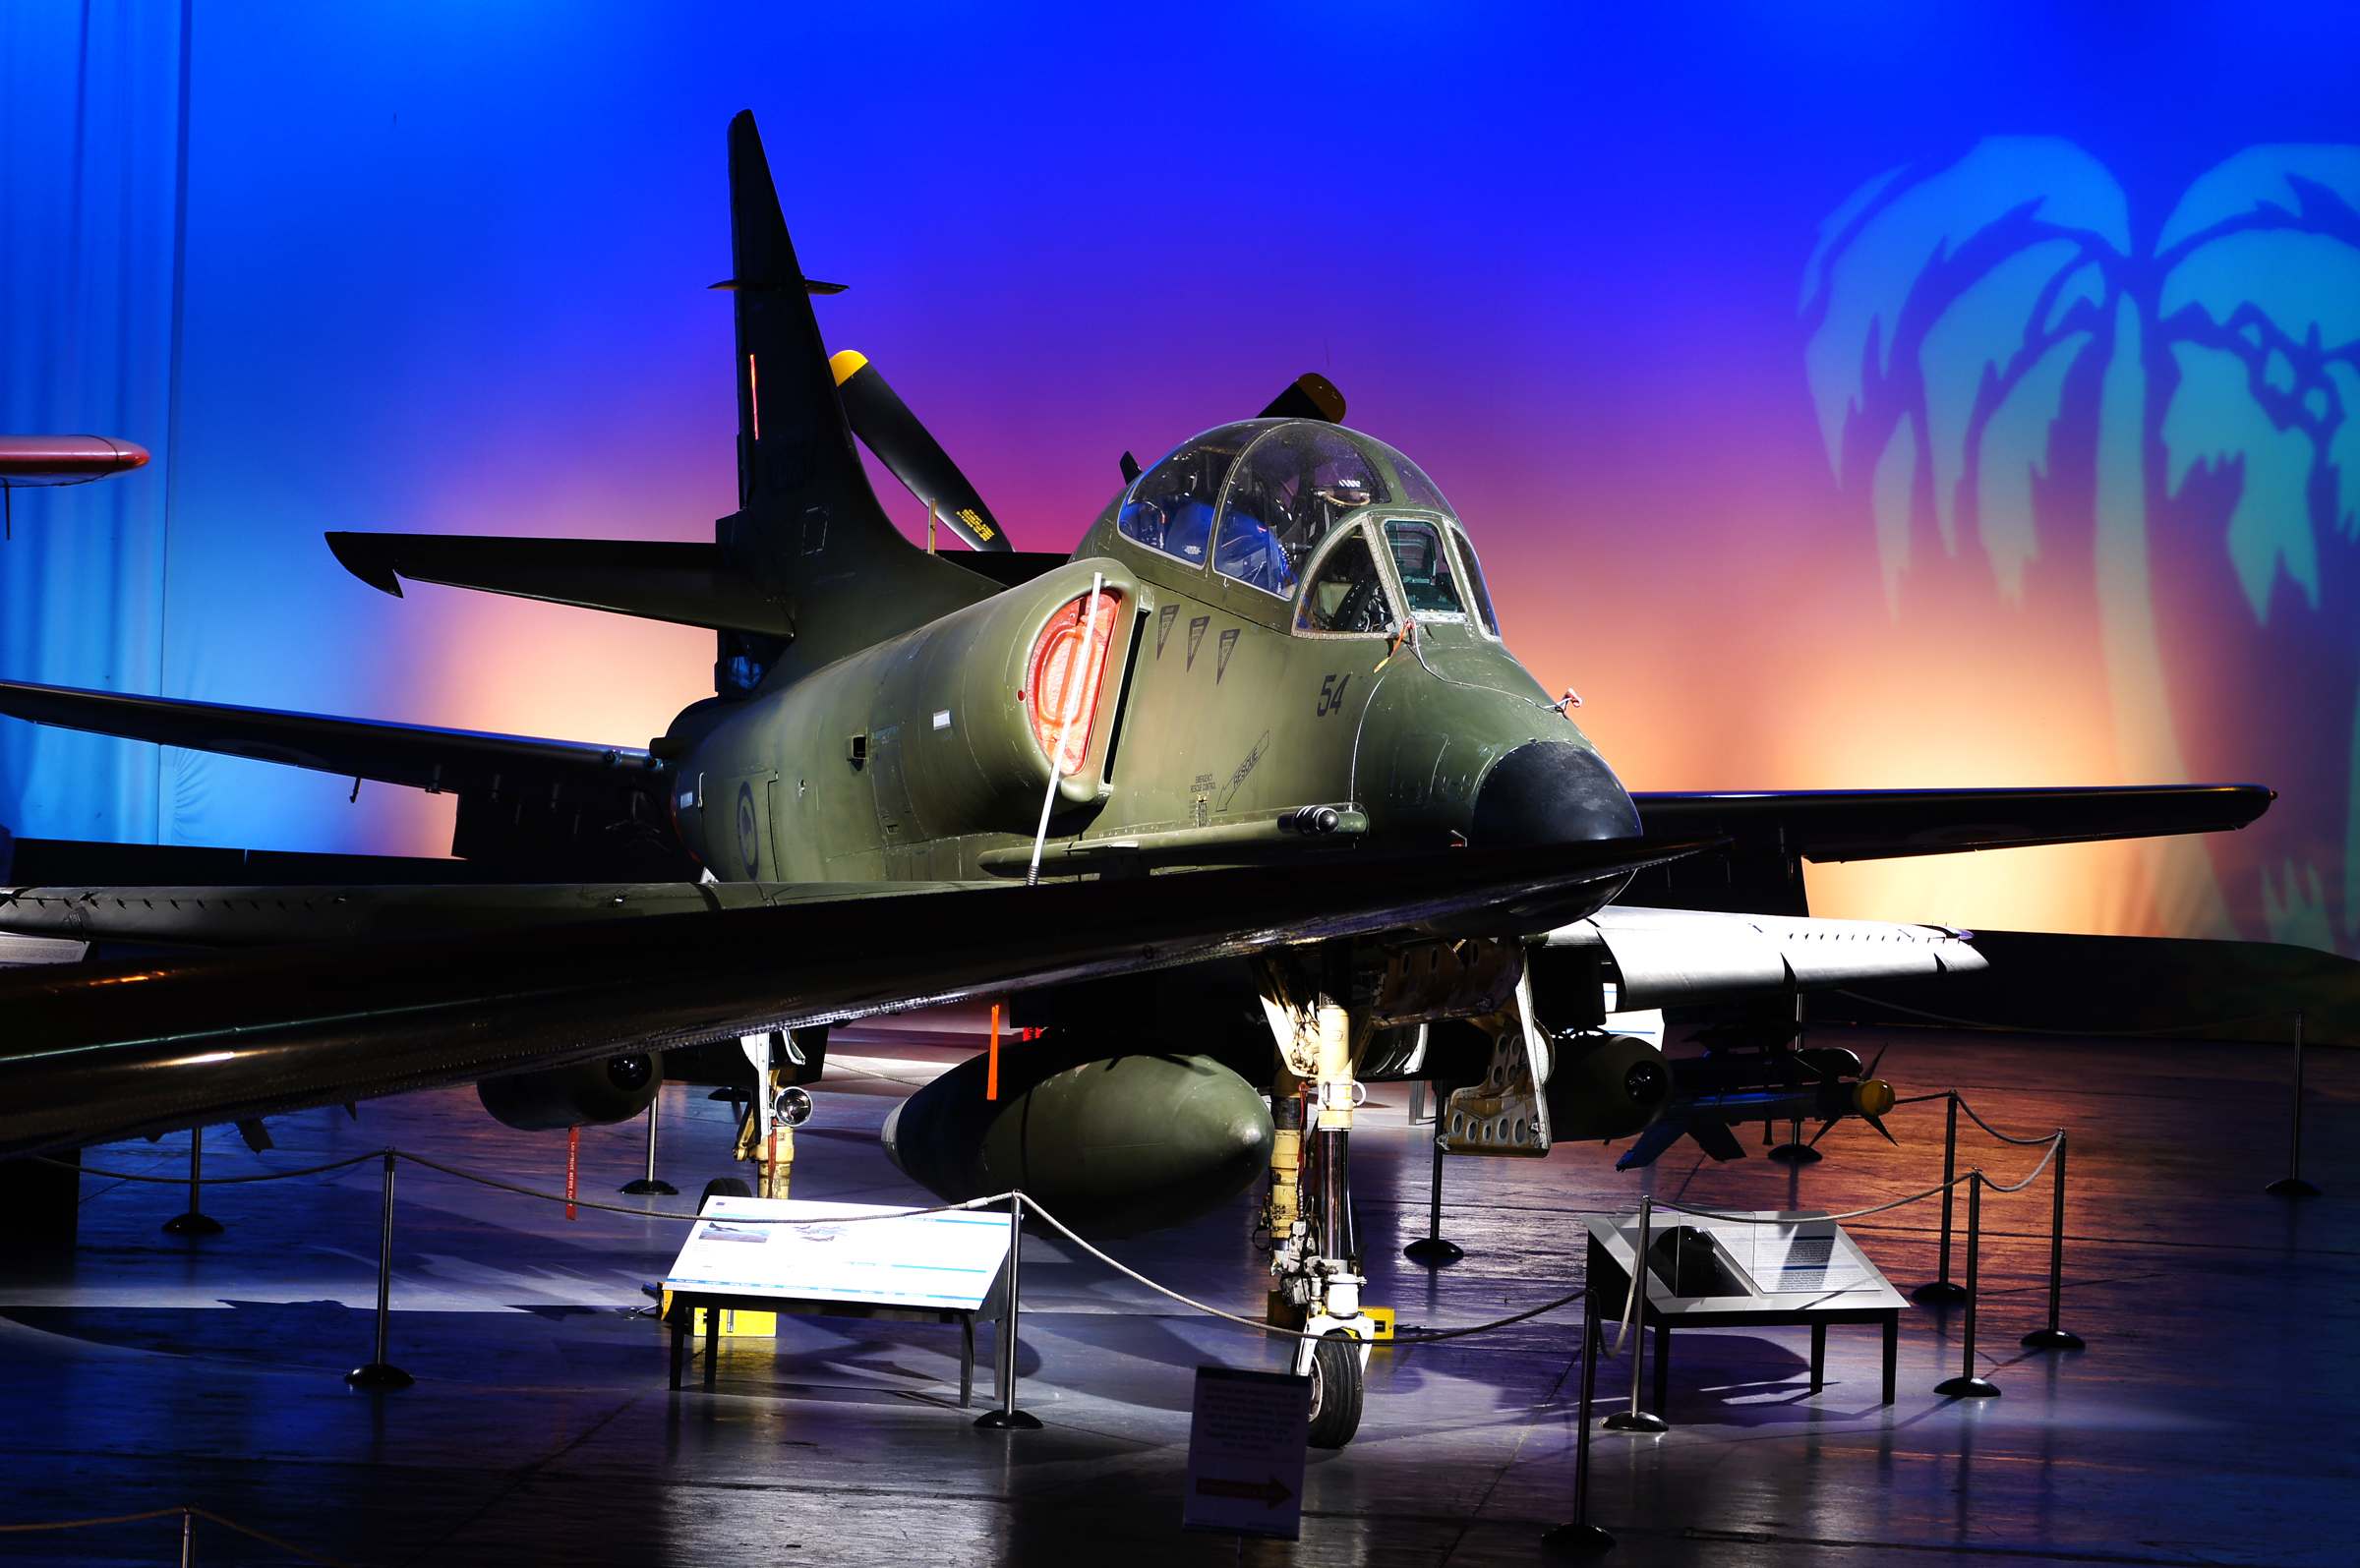 air force nz3 Air Force Museum of New Zealand   Must See Attraction